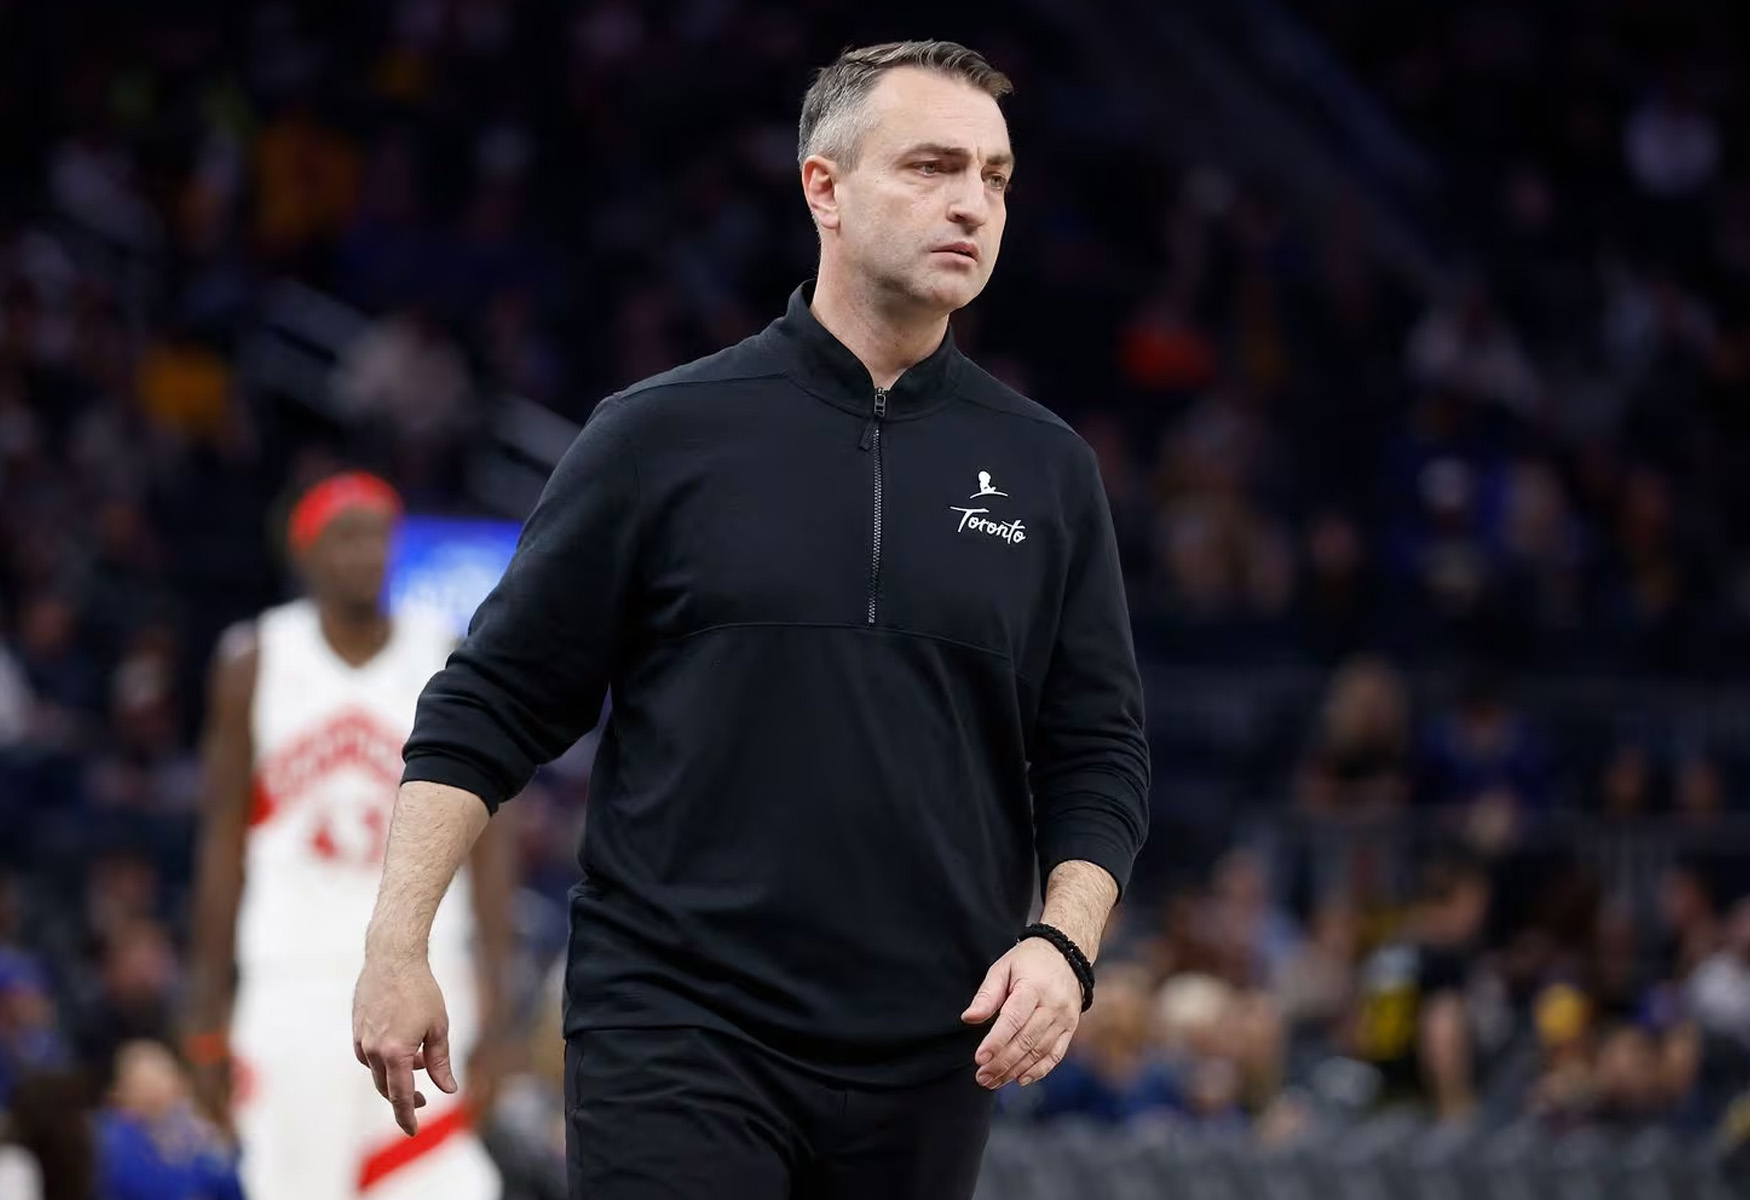 Raptors’ Darko Rajakovic Calls Out Referees For Biased Calls In Fiery Postgame Rant